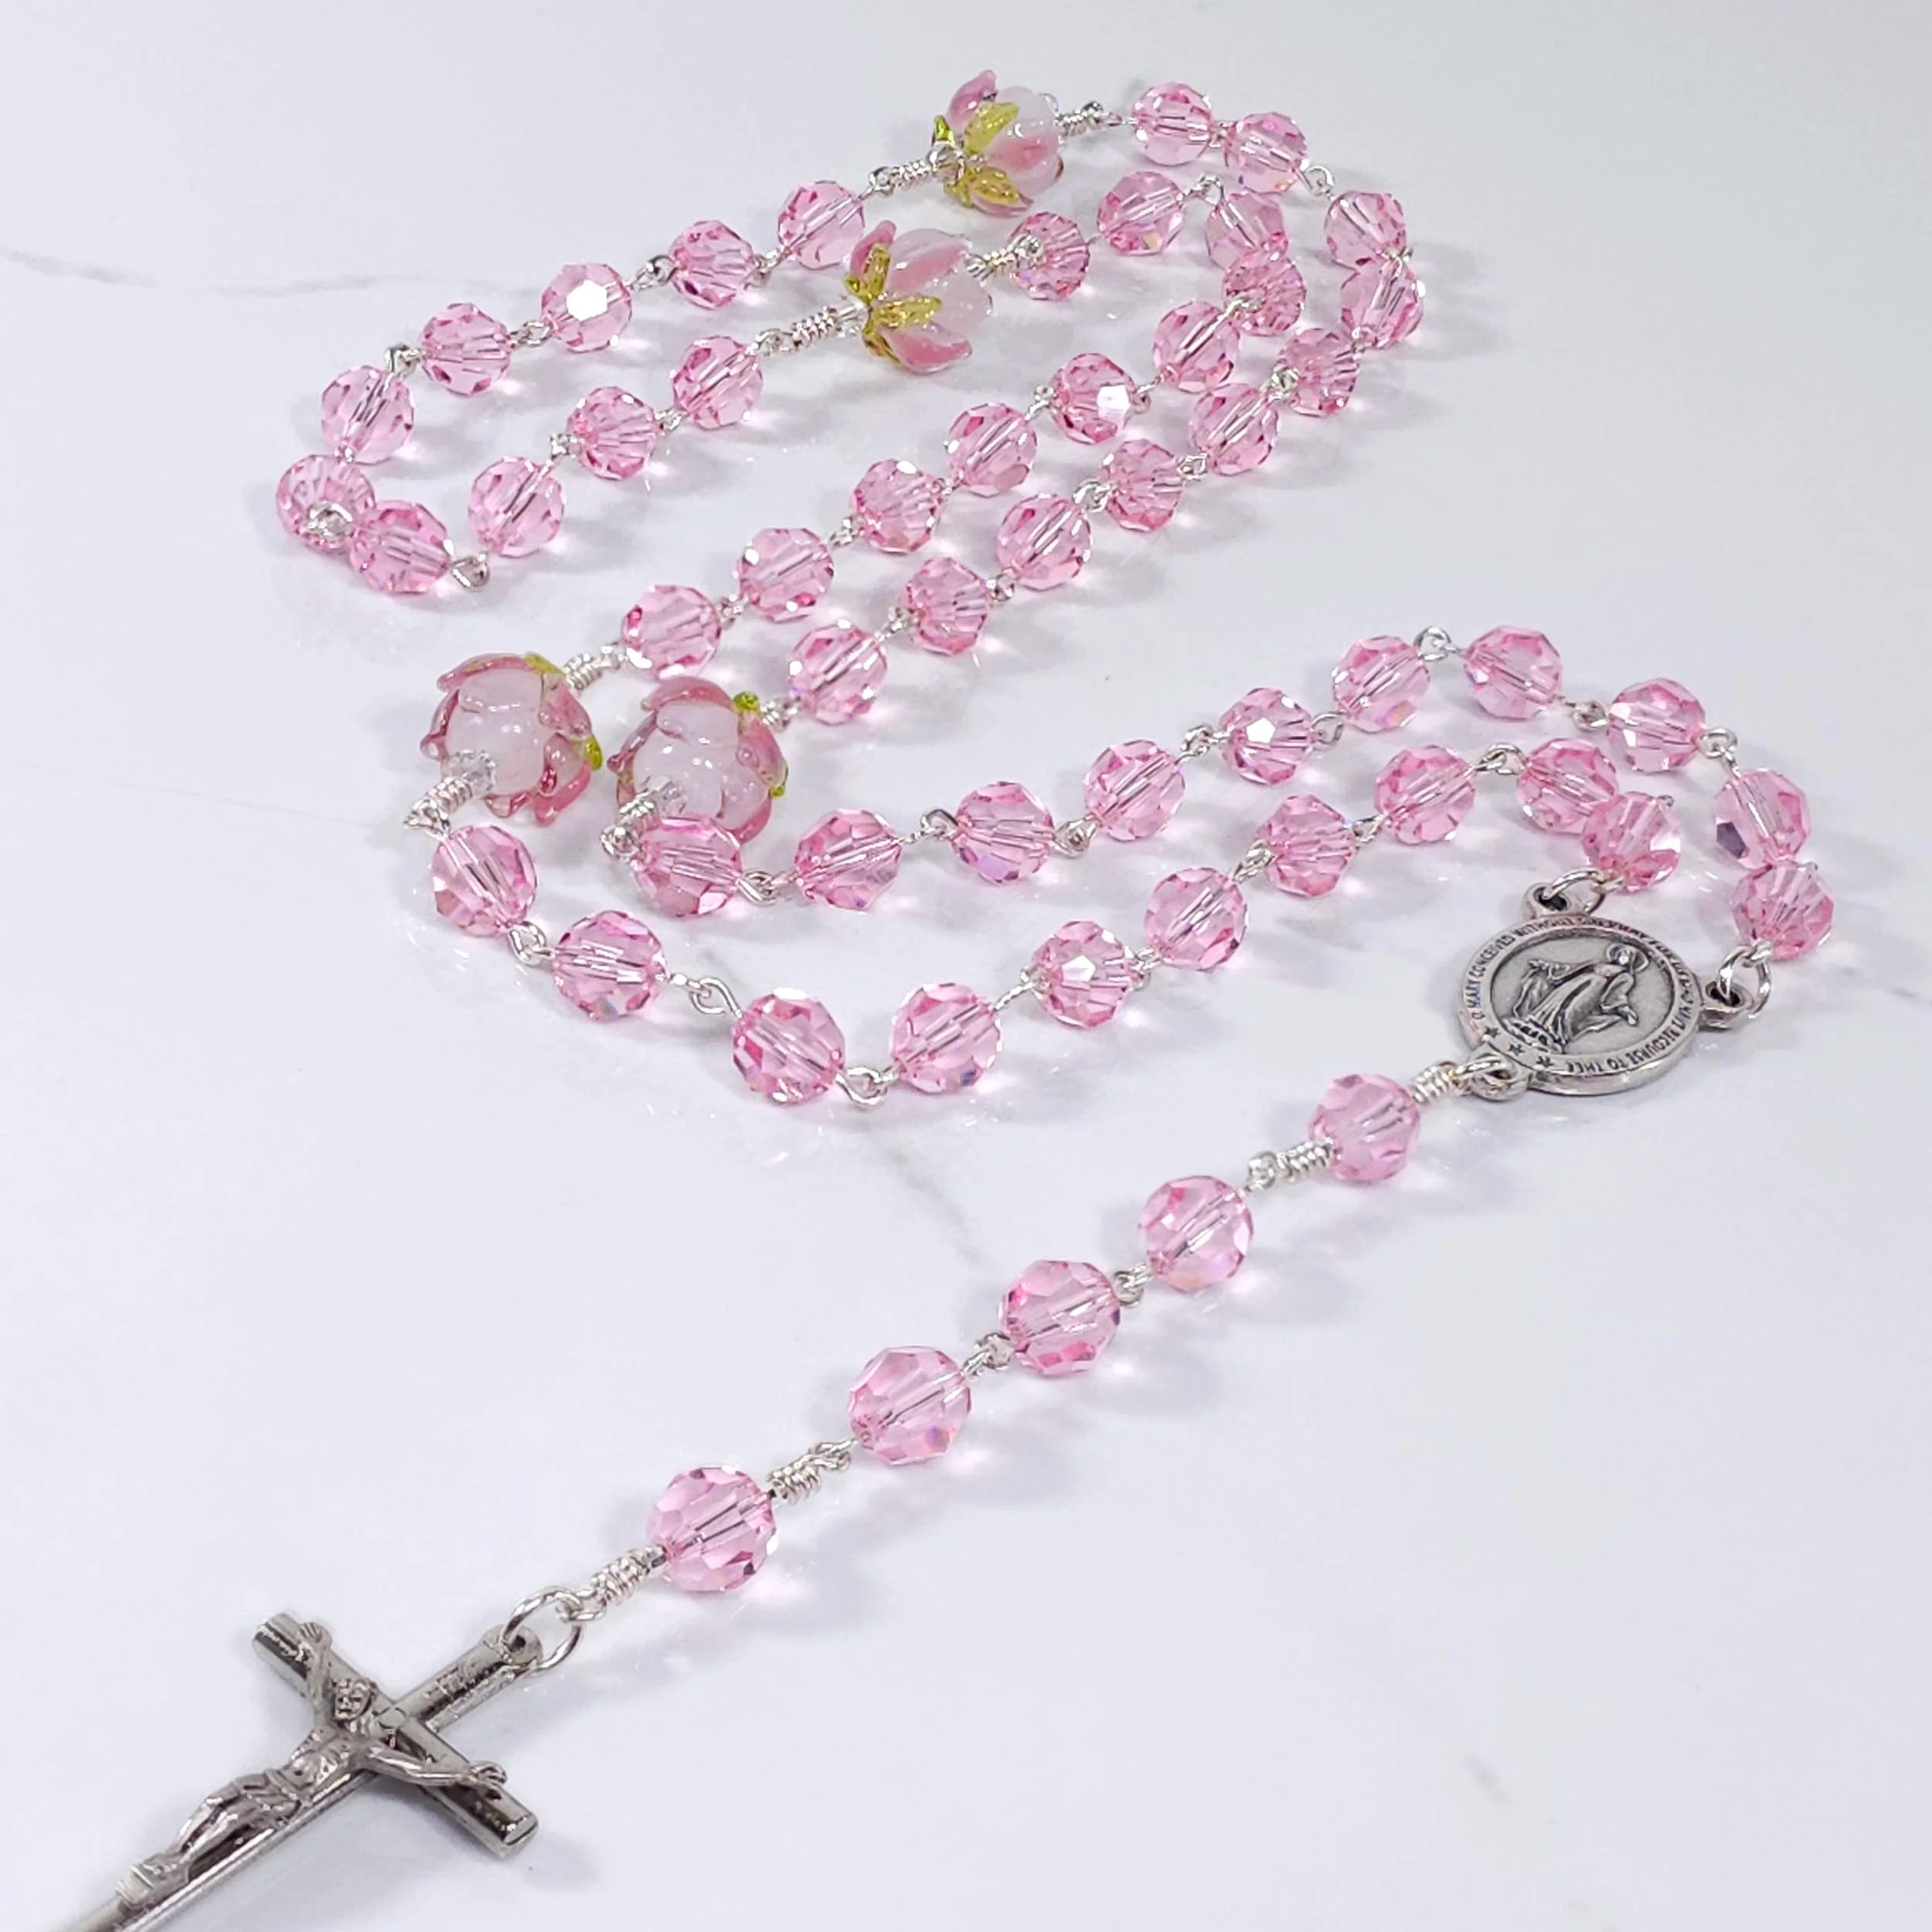 Pink our lady of miraculous medal rosary necklace.